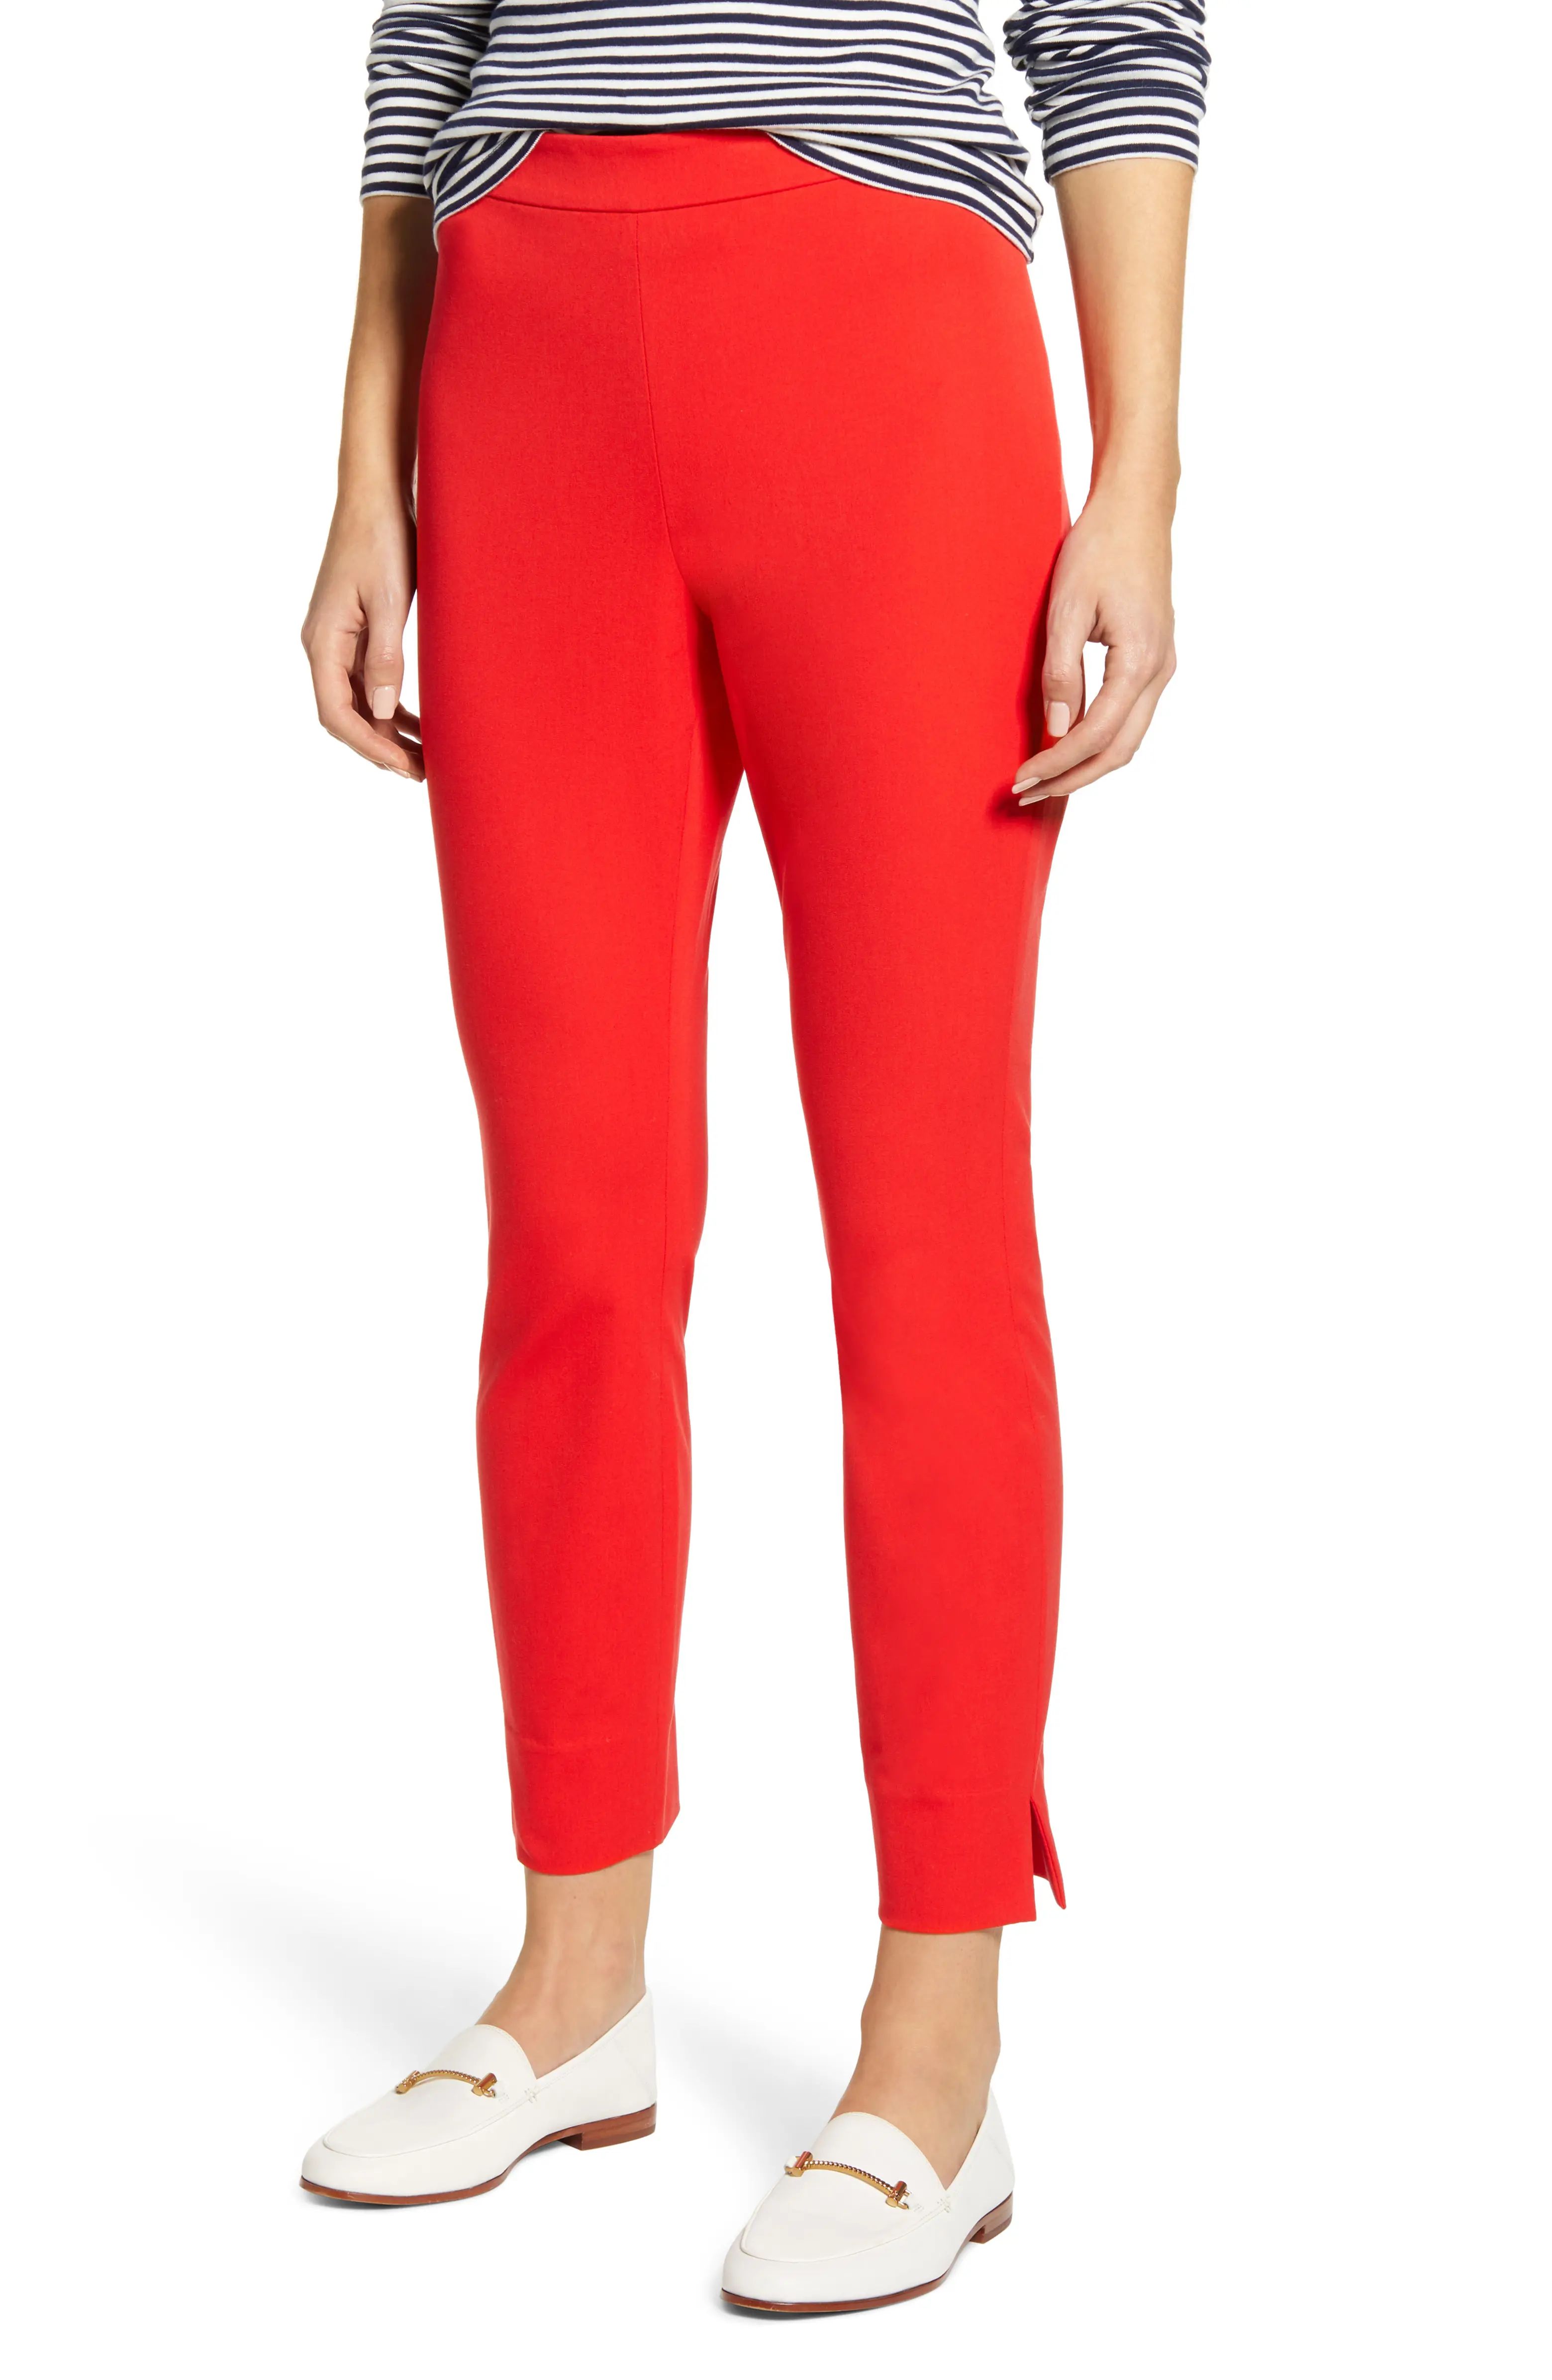 4-Way Stretch Ankle Skinny Pants | Nordstrom